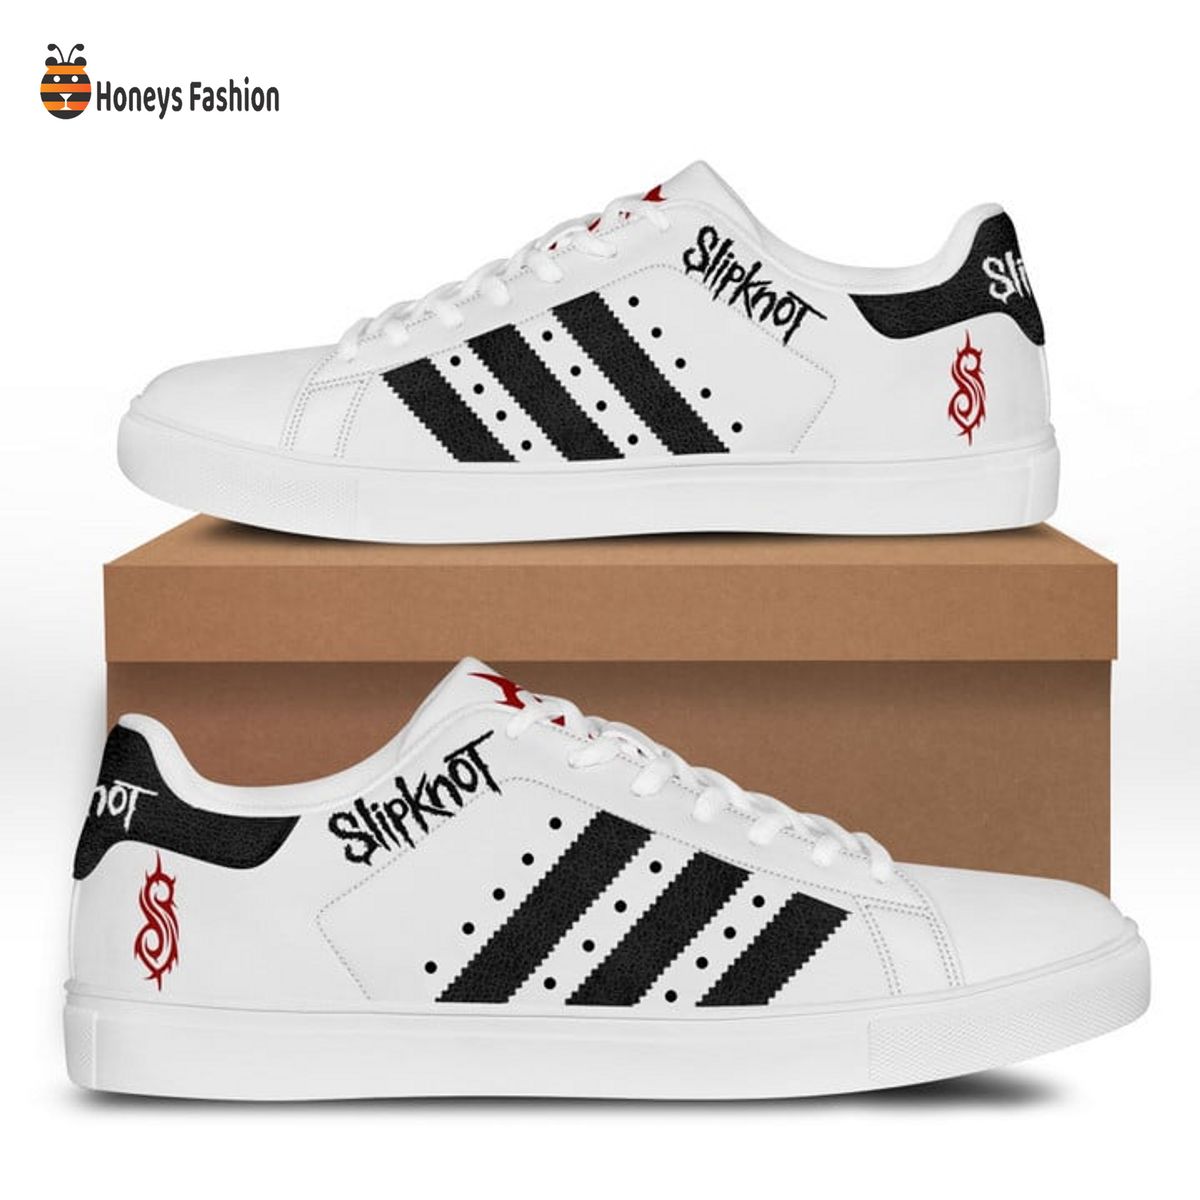 Slipknot Stan Smith Low Top Shoes